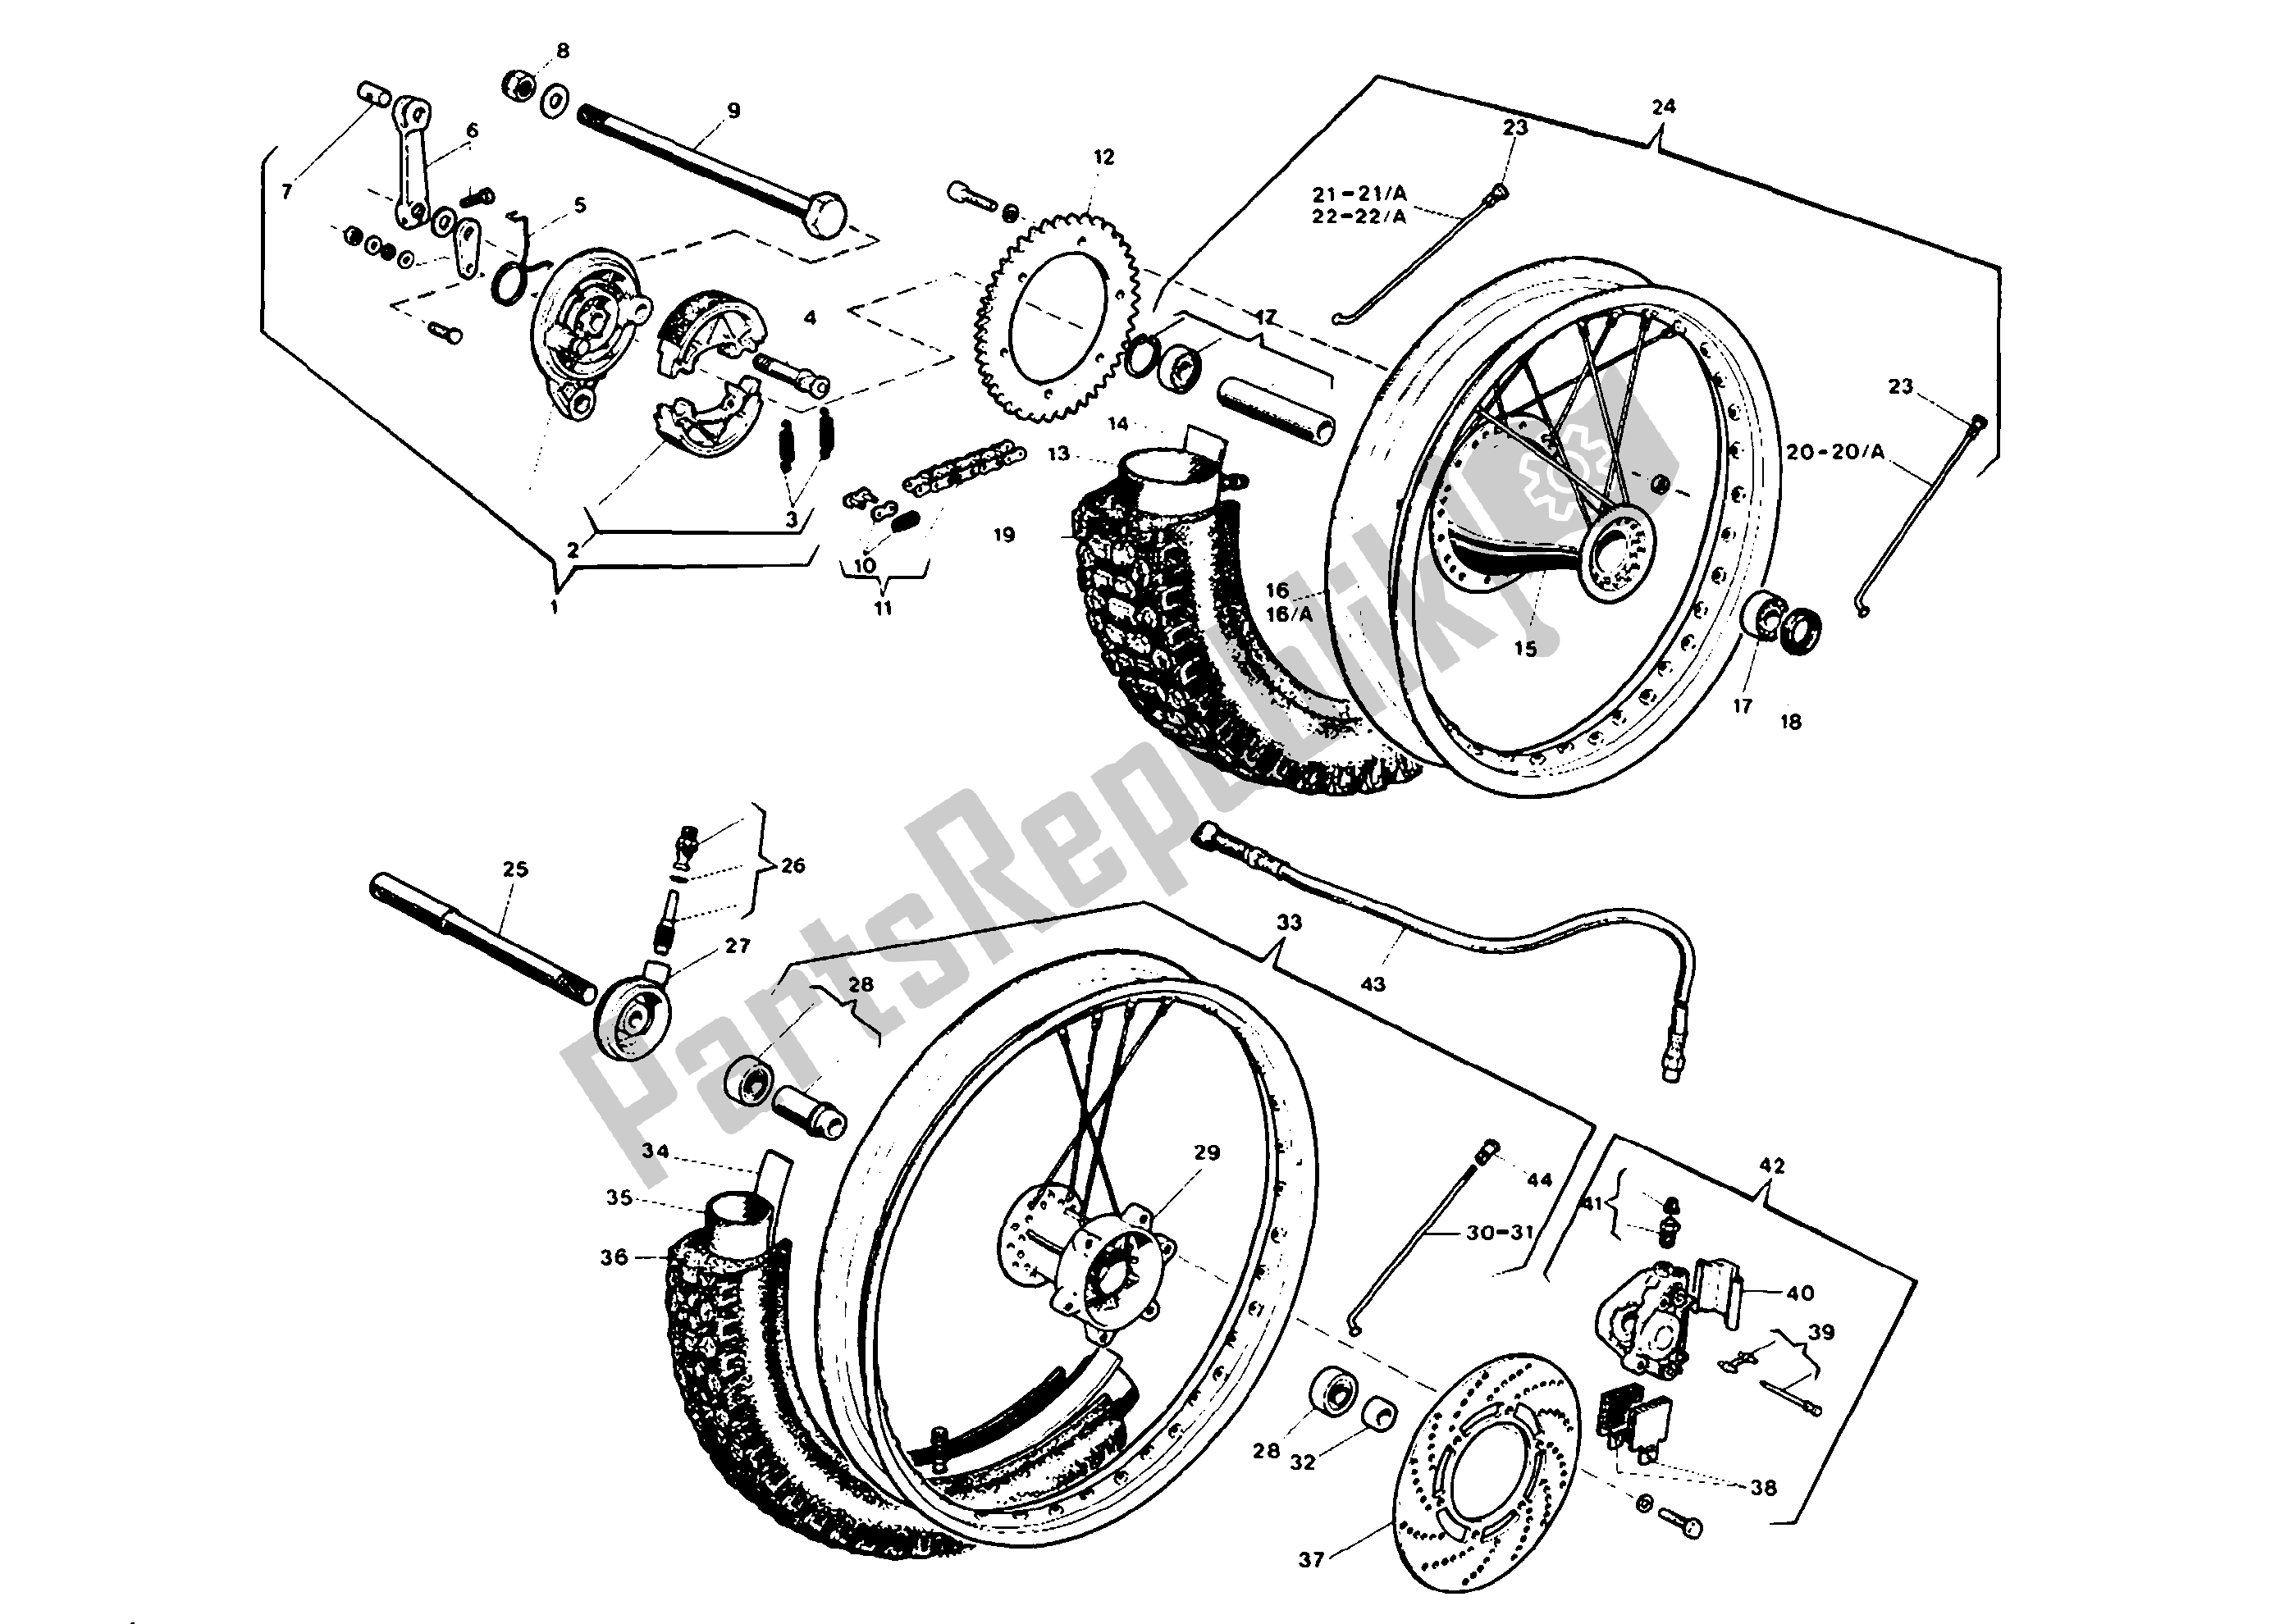 All parts for the Wheels of the Aprilia ETX 125 1984